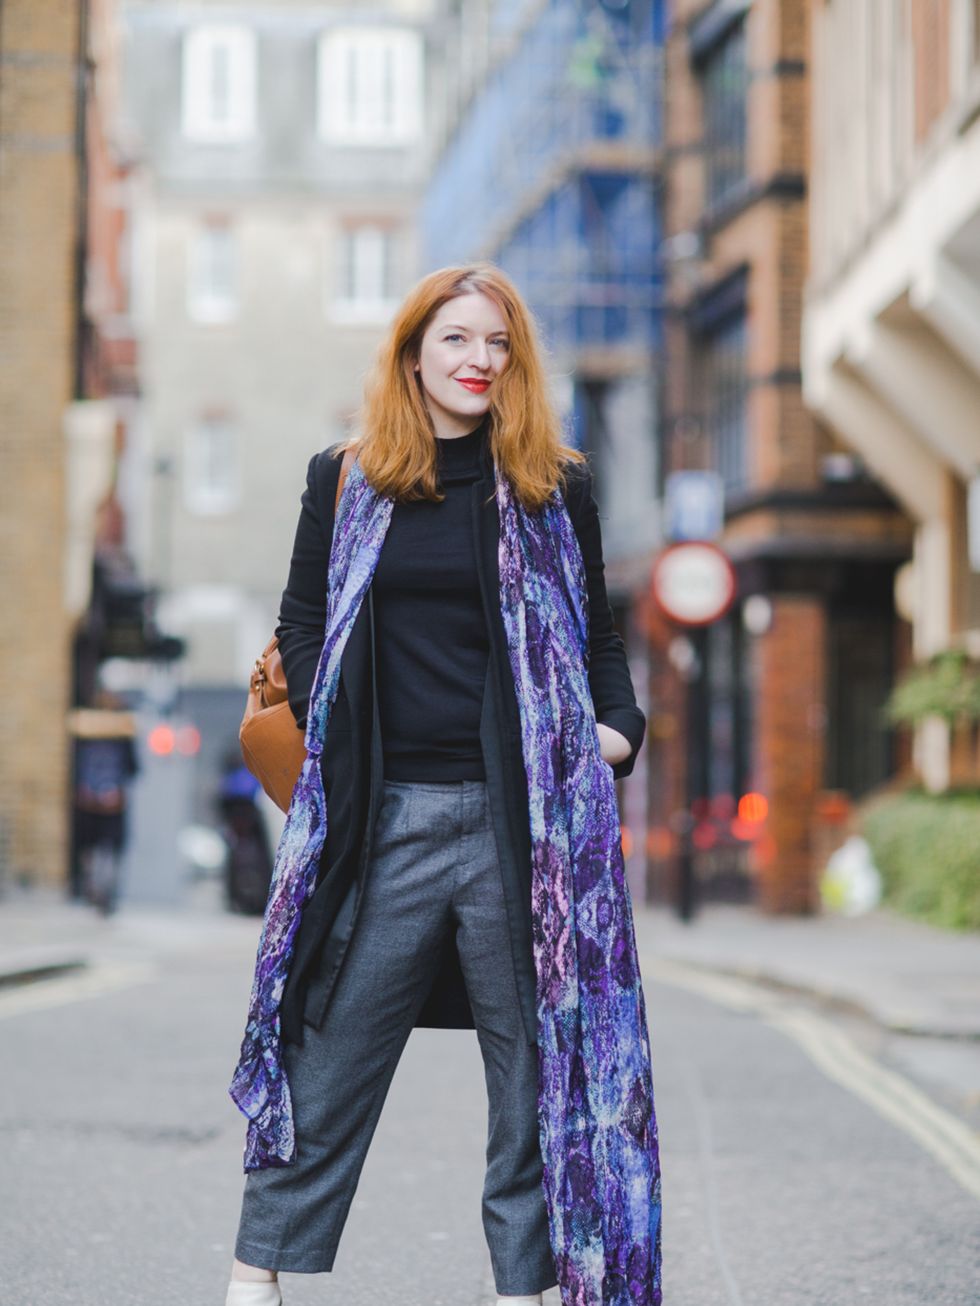 Natasha Pearlman - Deputy Editor.

Reiss coat, Marks & Spencer top, Margaret Howell trousers, Nicholas Kirkwood shoes, Lily and Lionel scarf, Asos backpack.